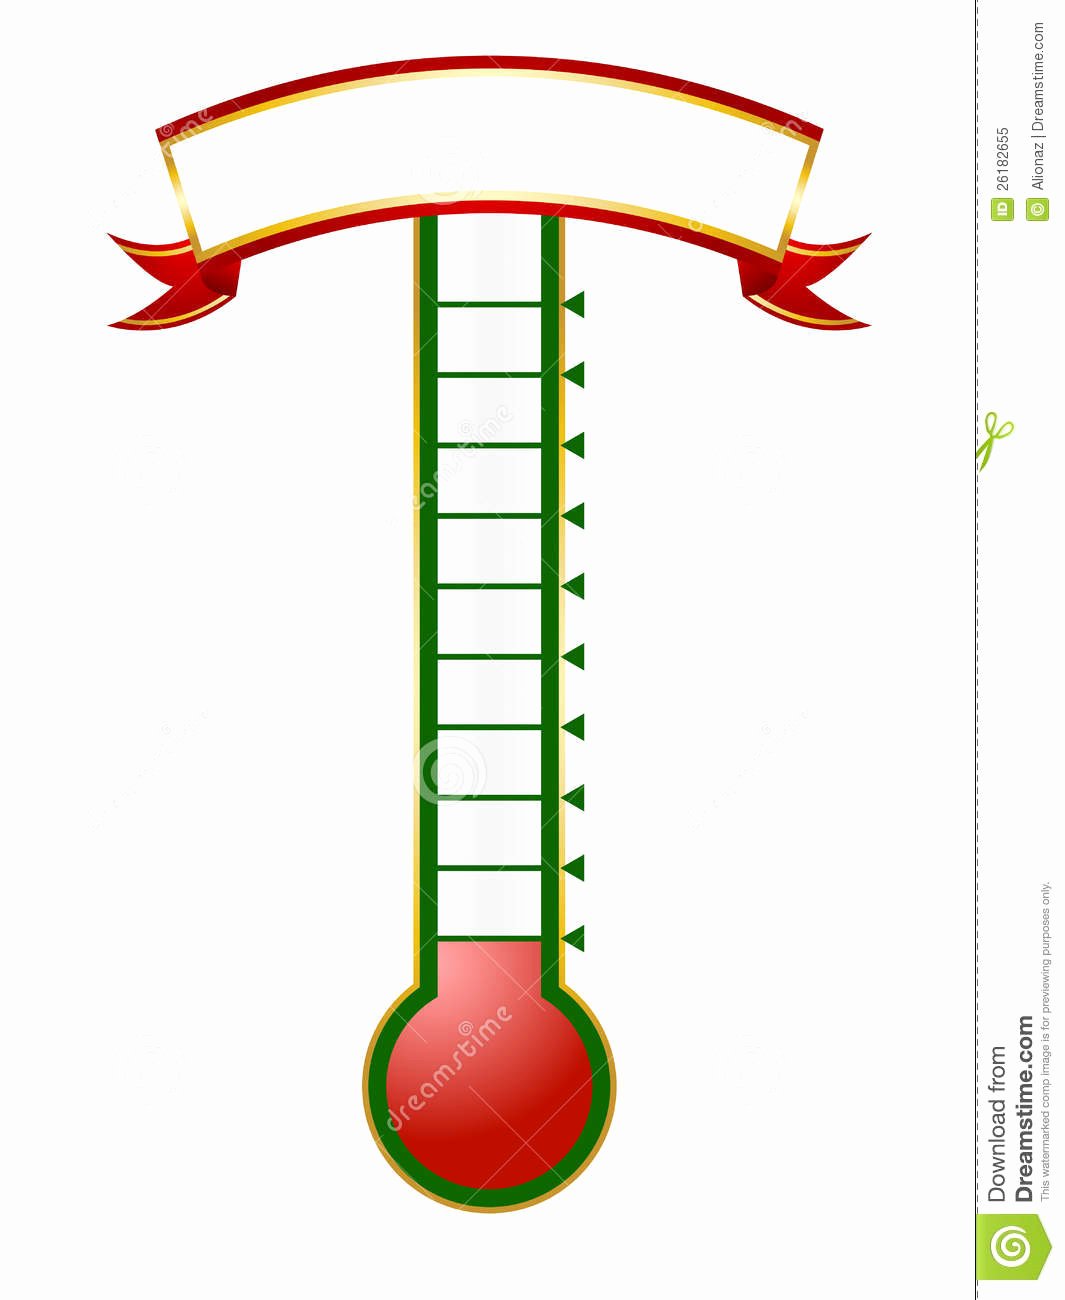 Fundraising thermometer Image Inspirational Goal thermometer Stock Vector Illustration Of Goal Empty